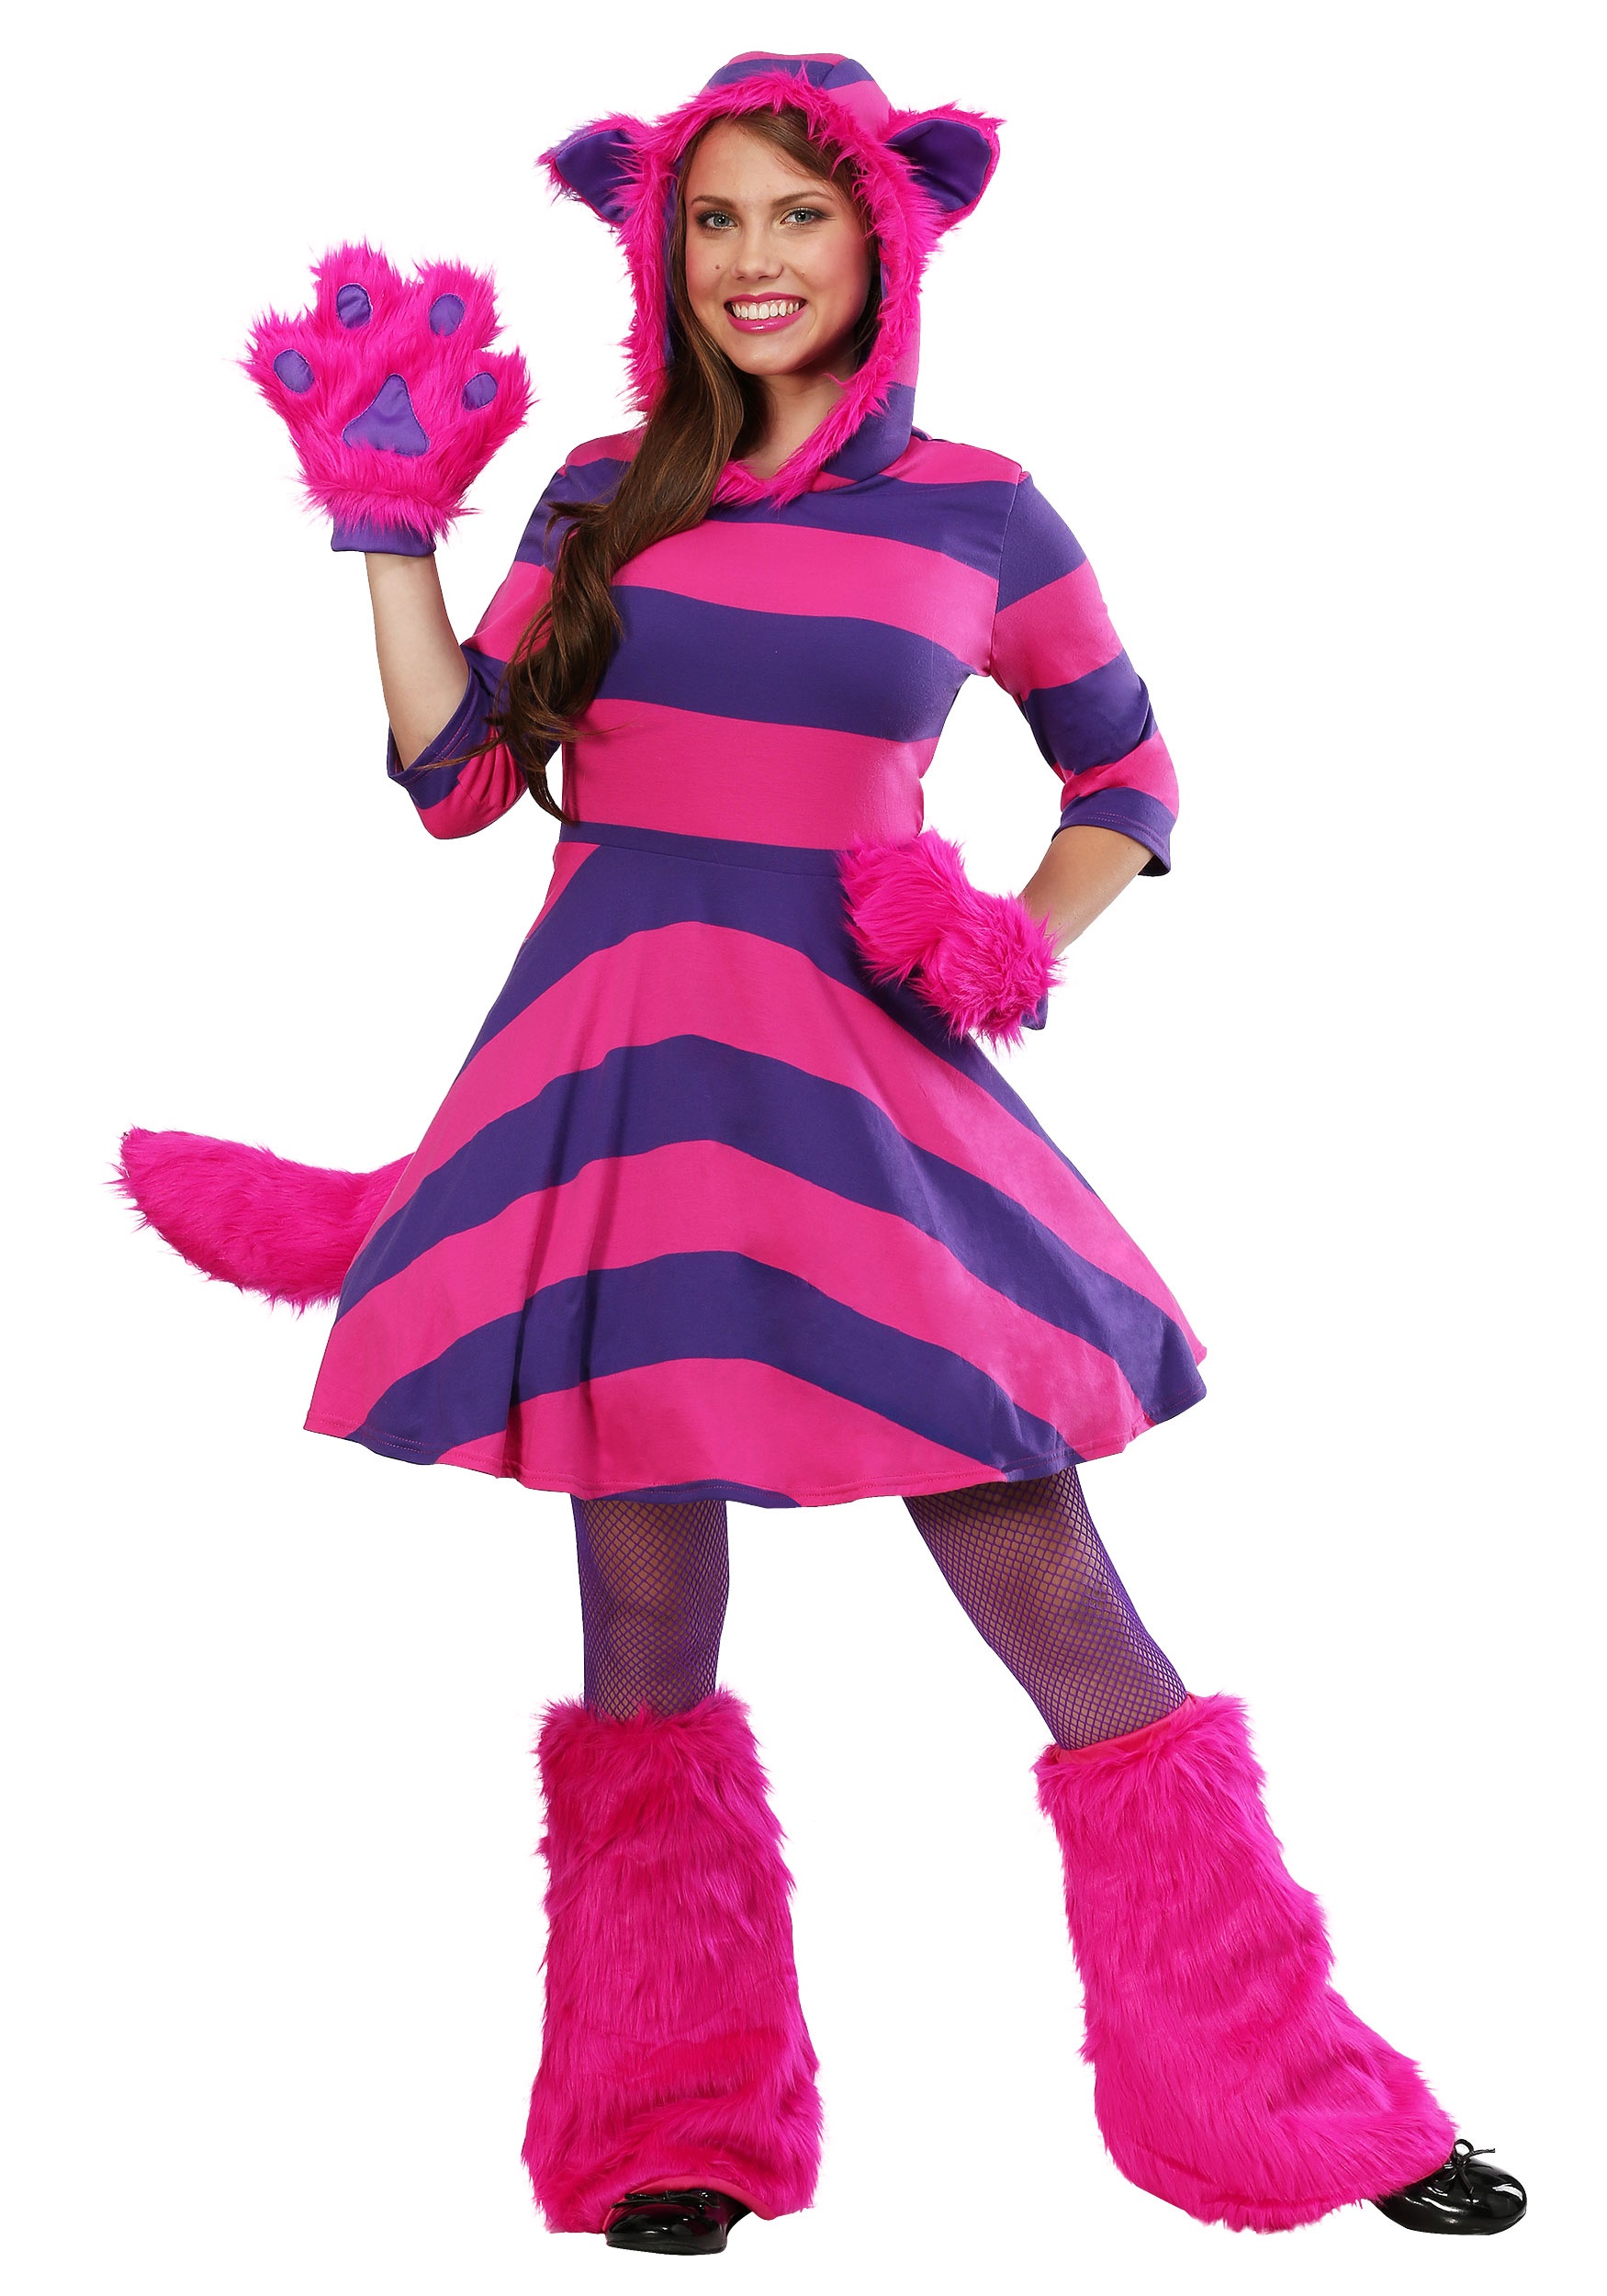 Cute Plus Size Halloween Costumes For Women - Cheshire Cat Plus Size Costume for Women